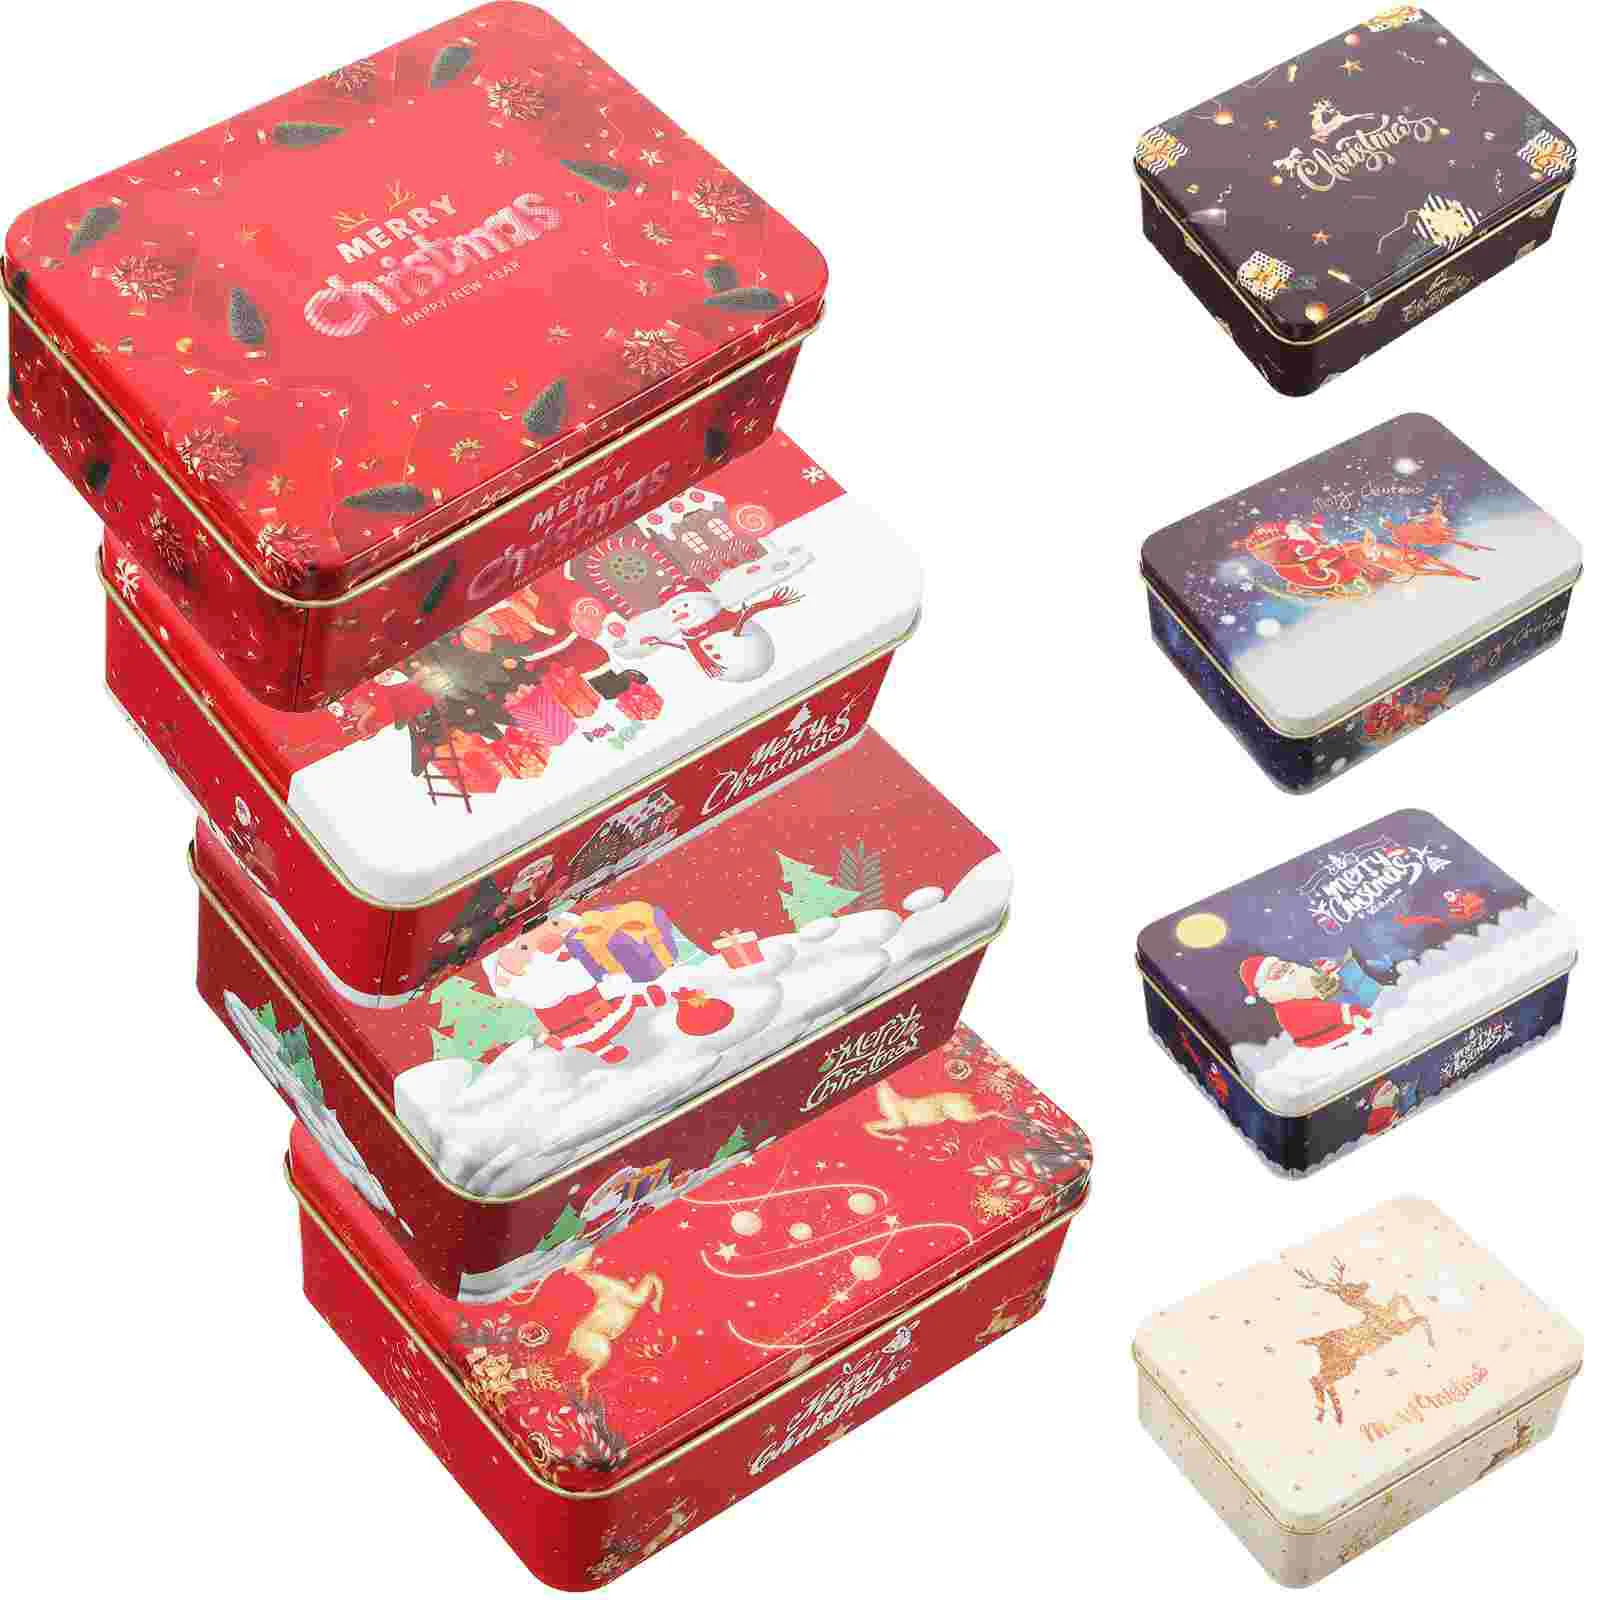 

Christmas Cookie Tins Lids Round Retro Candy Tinplate Tins Empty Gift Candy Box Cookie Containers Storing Biscuits